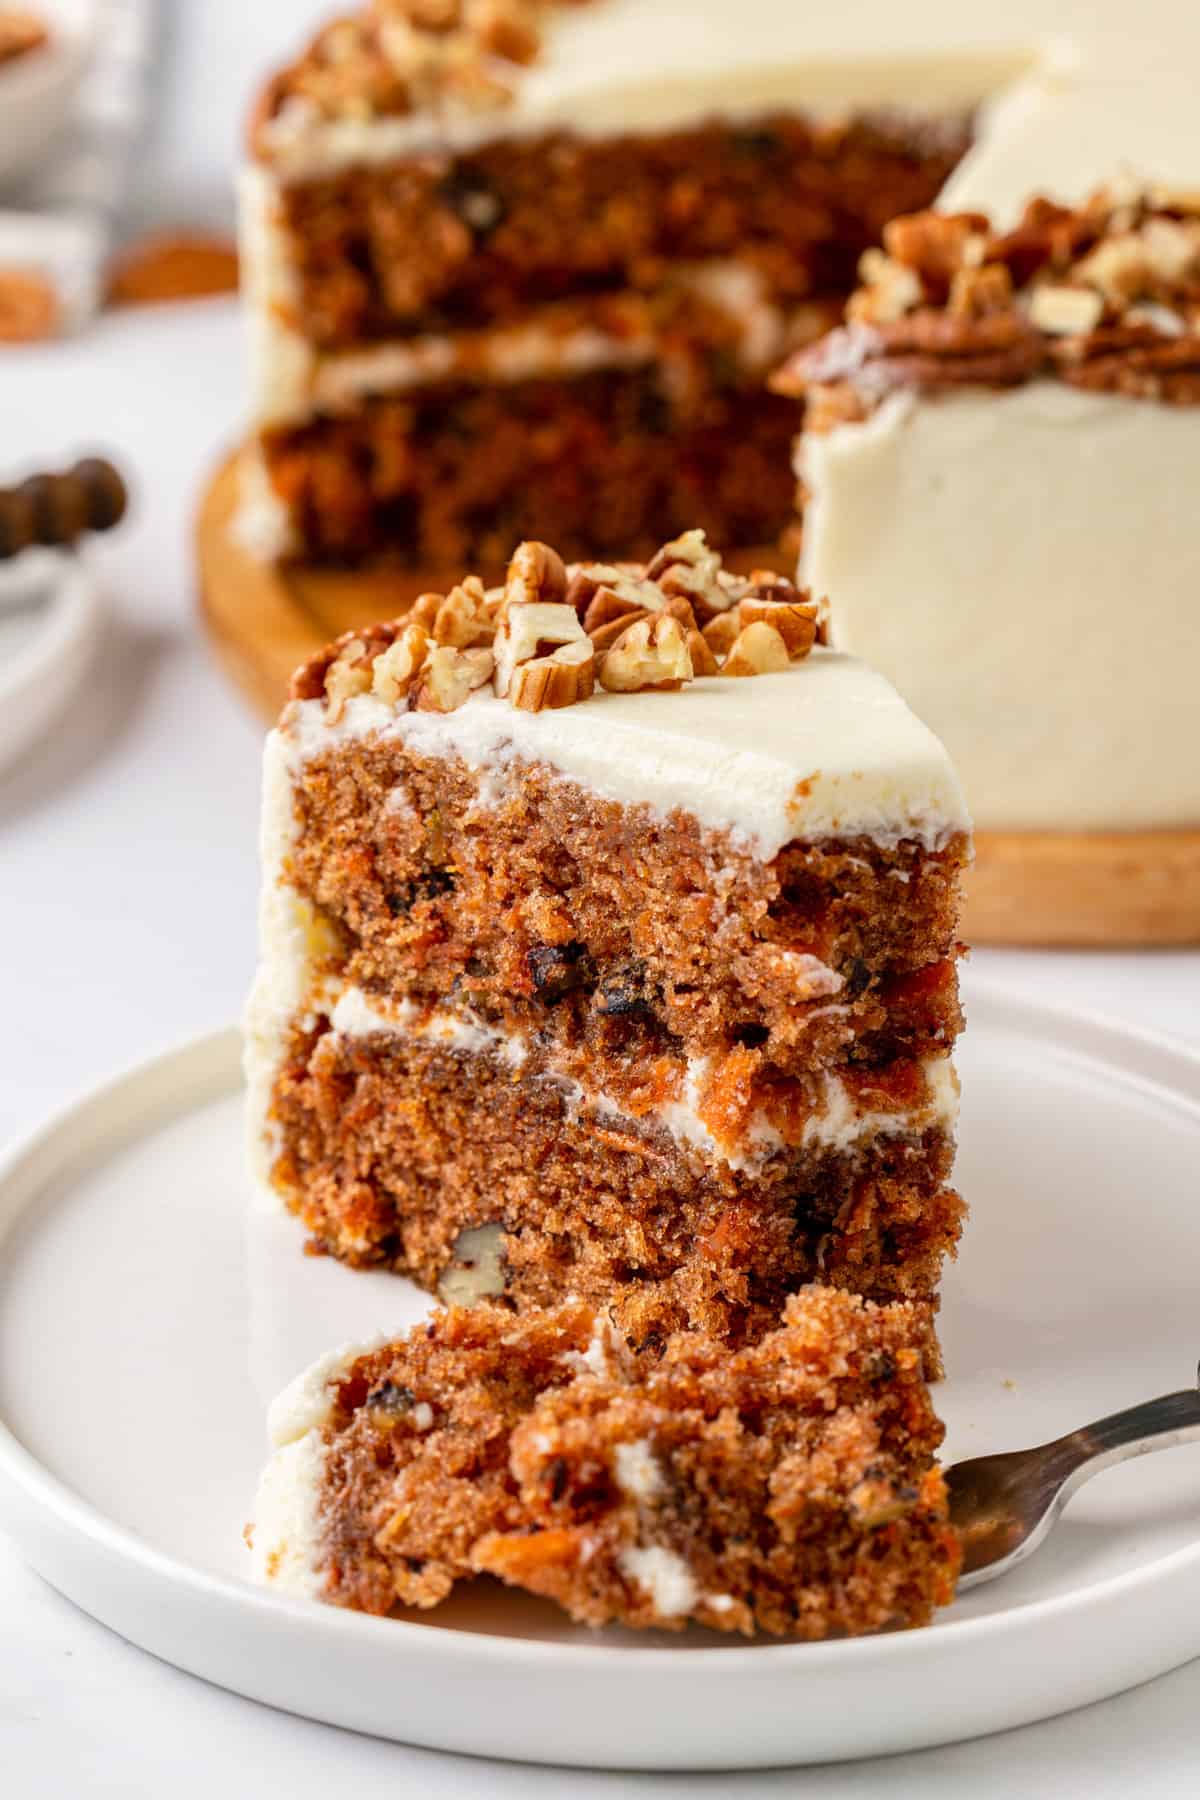 close up image of a slice of simple carrot cake served on a white round plate with a bite taken out of it.